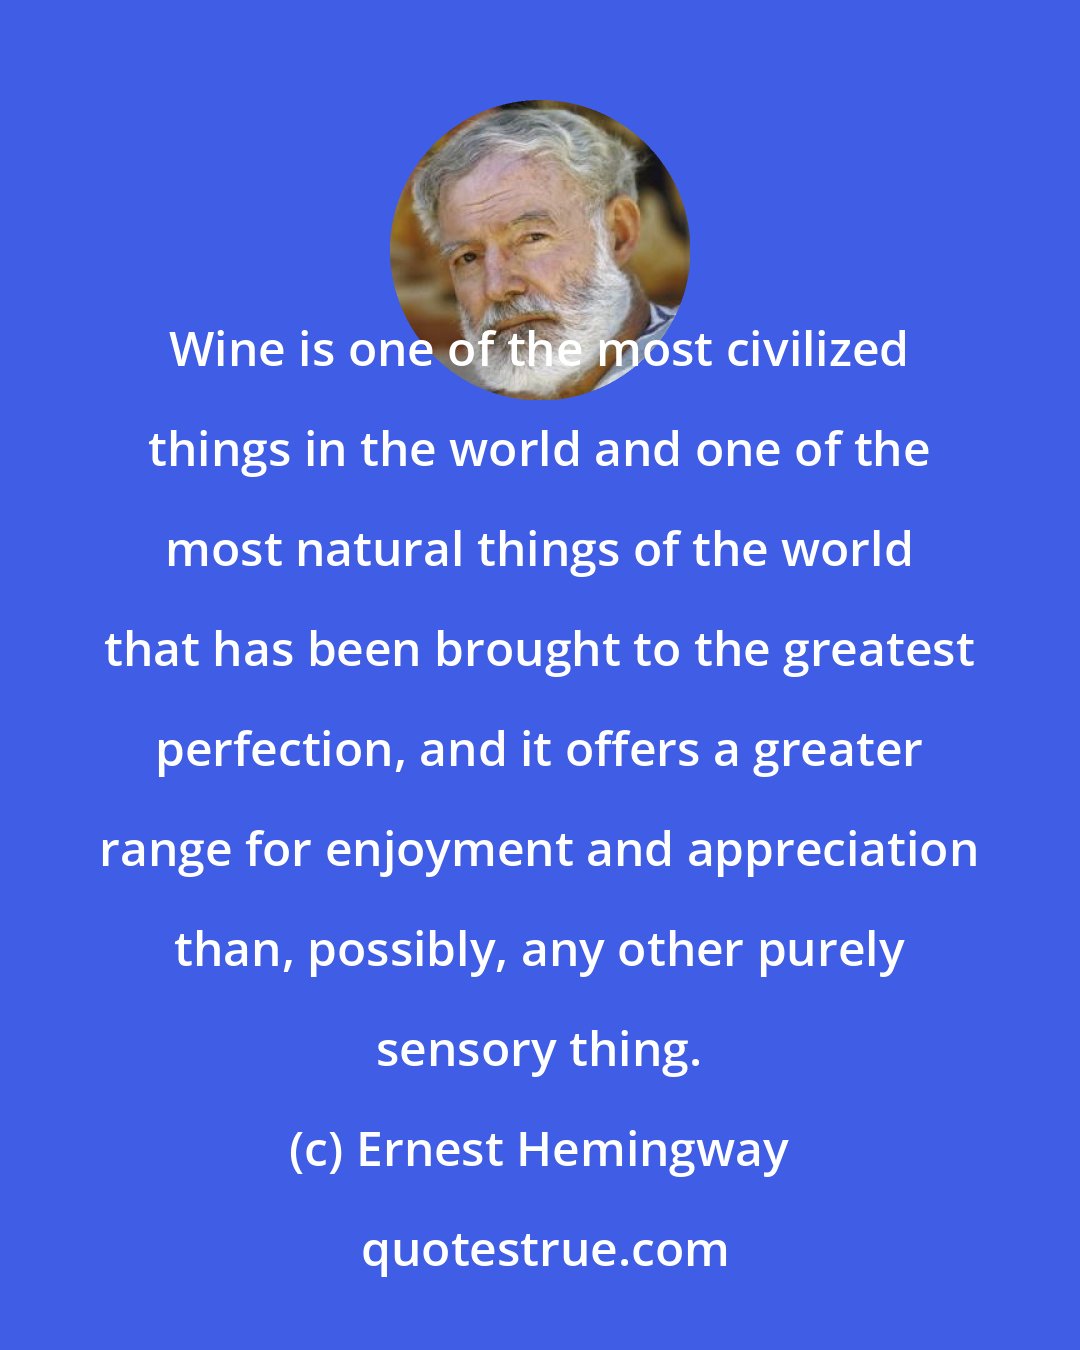 Ernest Hemingway: Wine is one of the most civilized things in the world and one of the most natural things of the world that has been brought to the greatest perfection, and it offers a greater range for enjoyment and appreciation than, possibly, any other purely sensory thing.